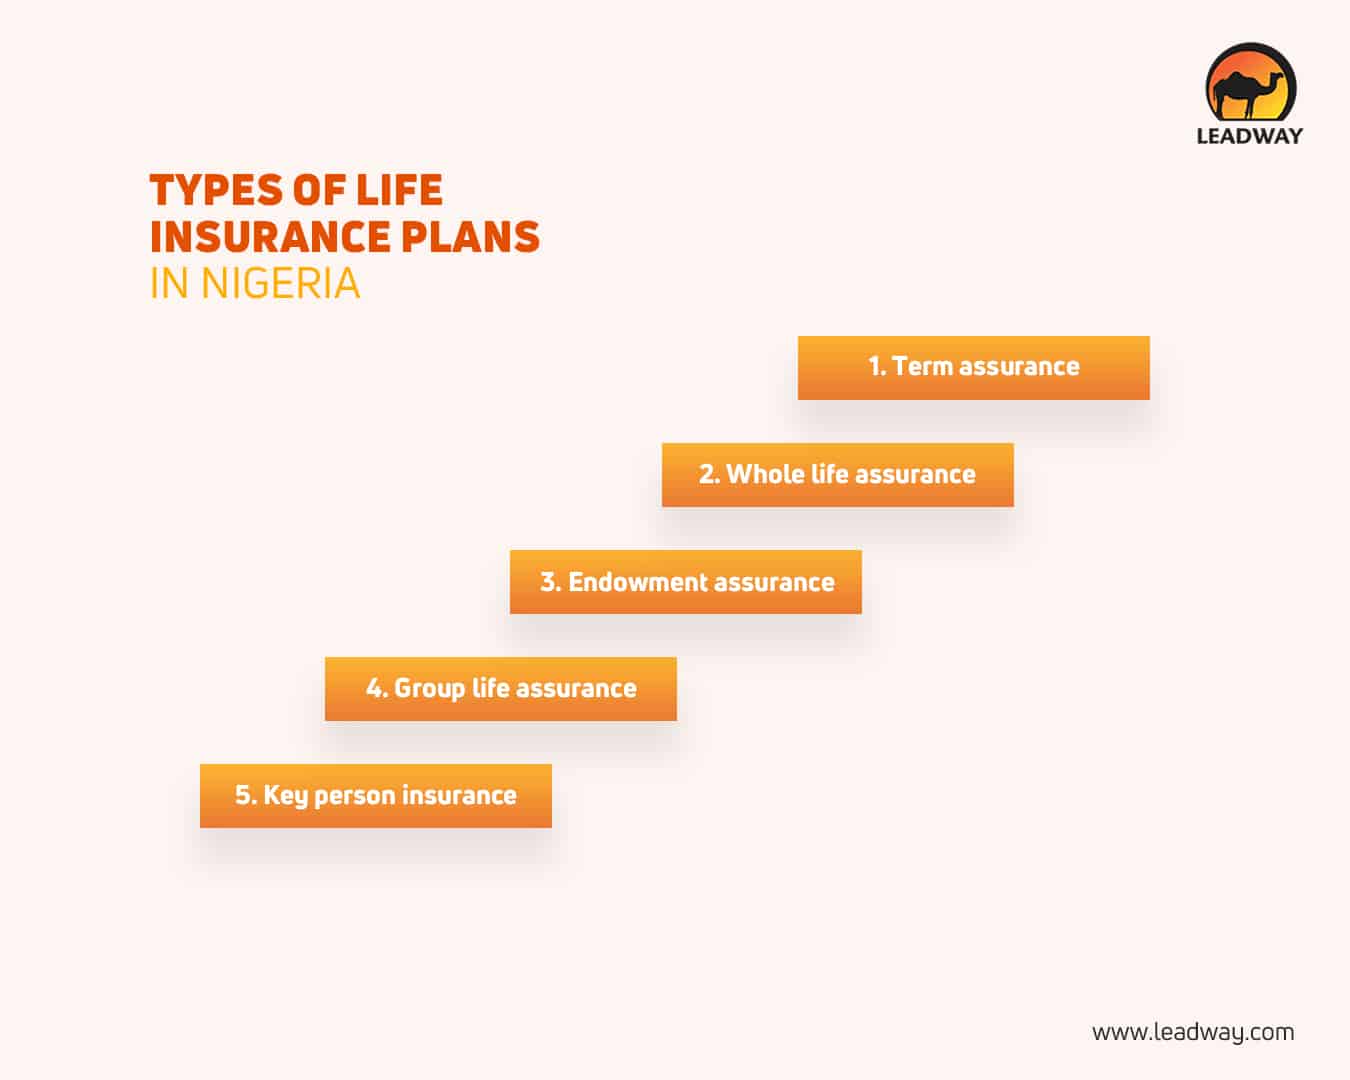 Types of life insurance plans in Nigeria infographic